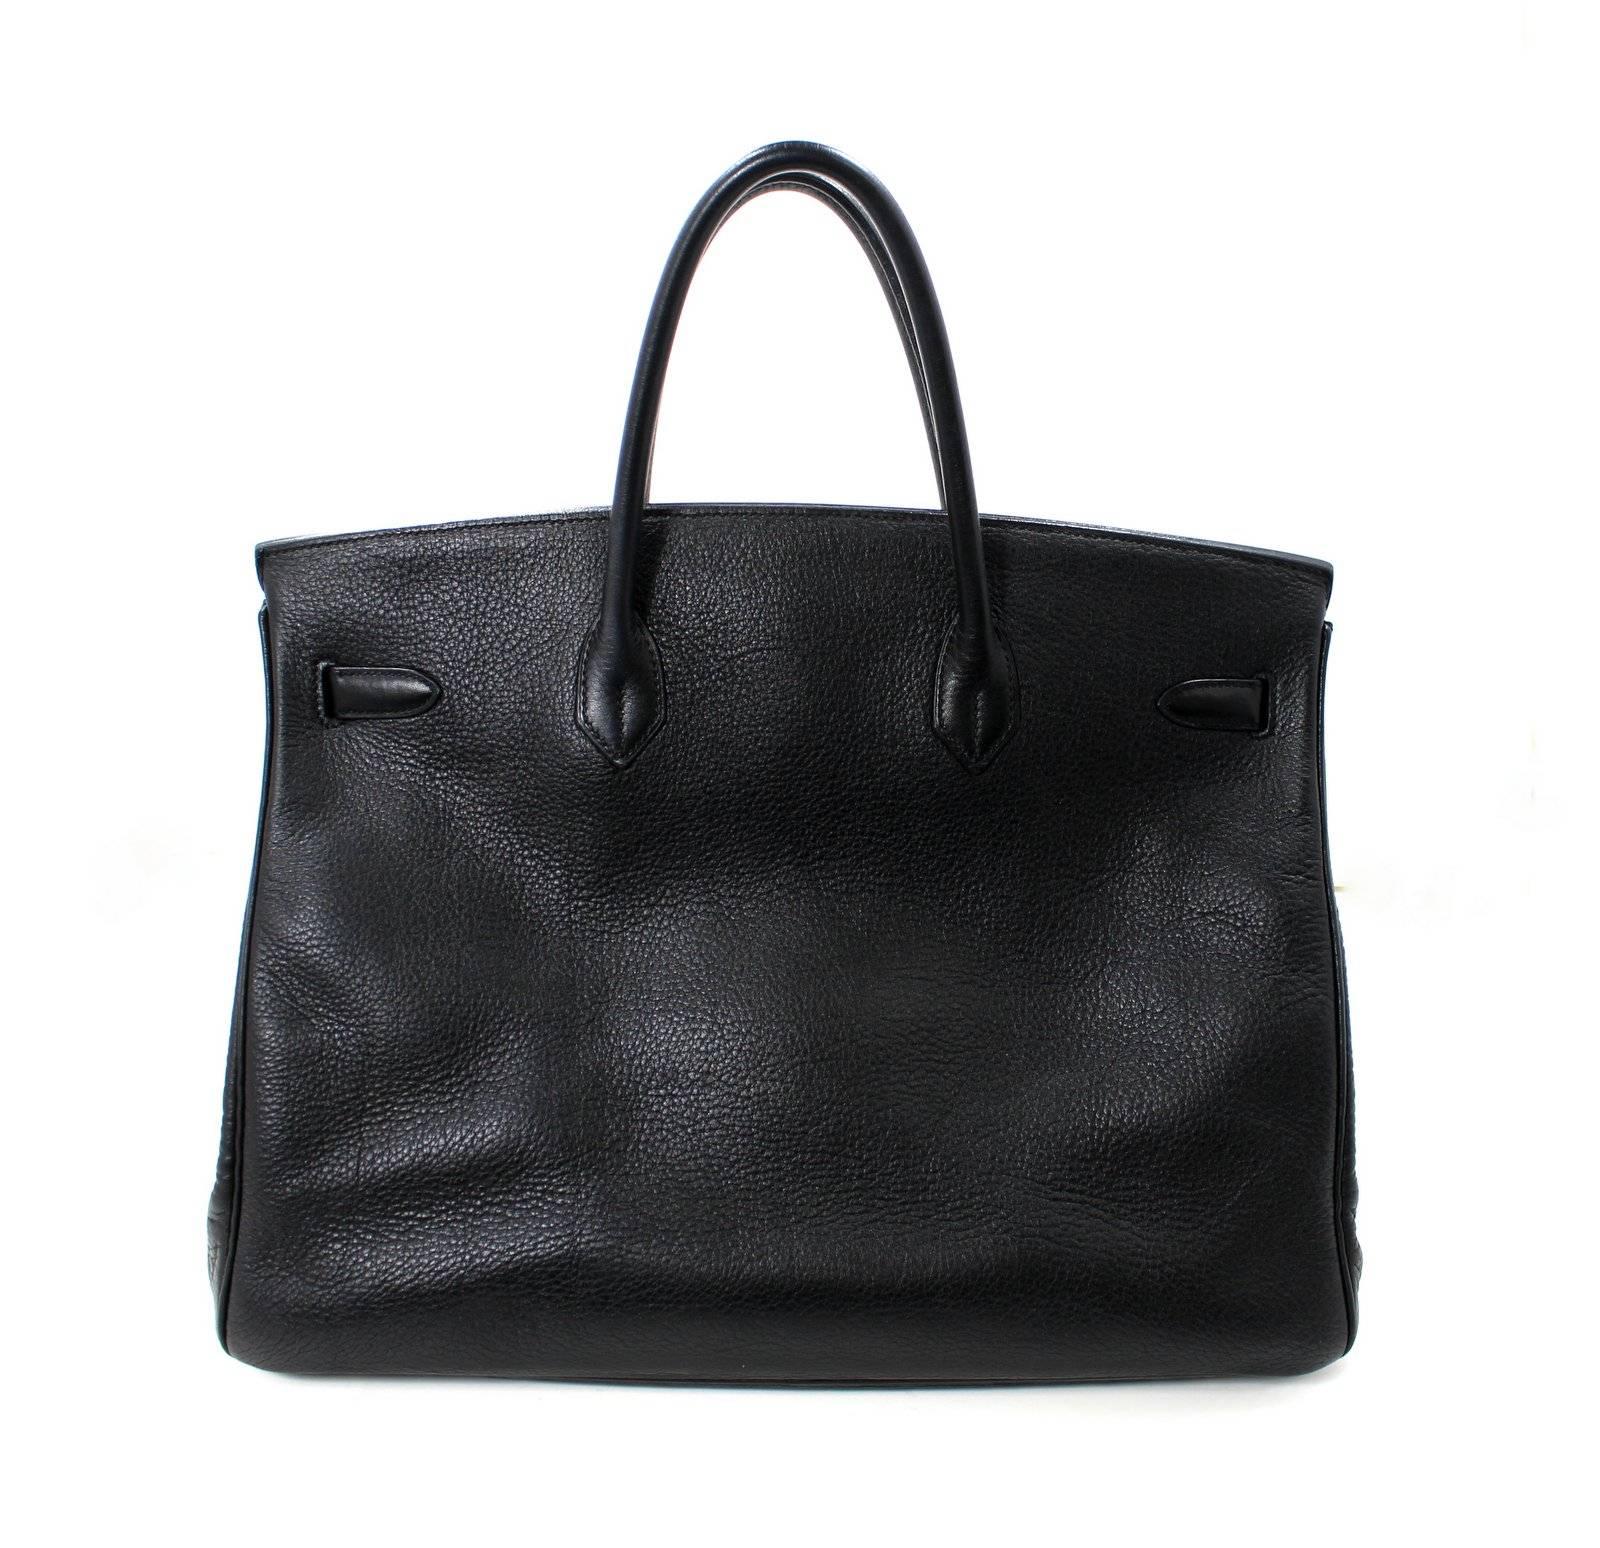 Hermès Black Buffalo Birkin- 40 cm, A stamp, Gold Hardware
VERY GOOD CONDITION with signs of general light use

The initials “D.A.W.” are subtly embossed in black on the front.   There is light wear on the corners, bottom and hardware.   The